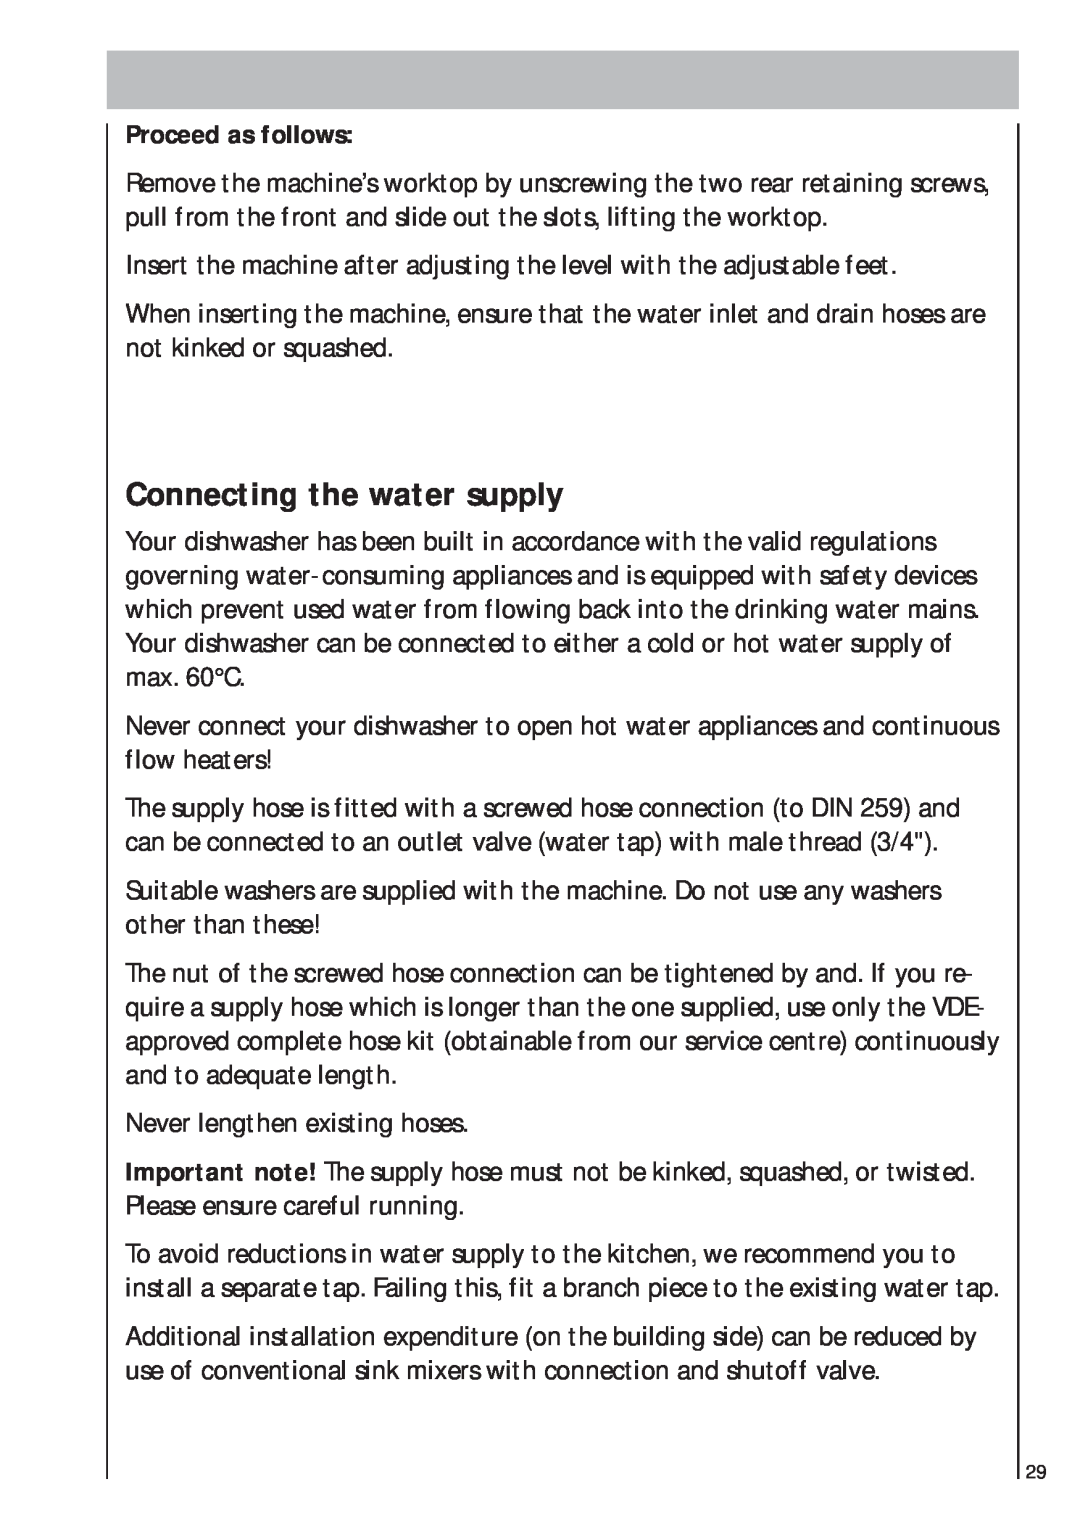 AEG 403 manual Connecting the water supply, Proceed as follows 